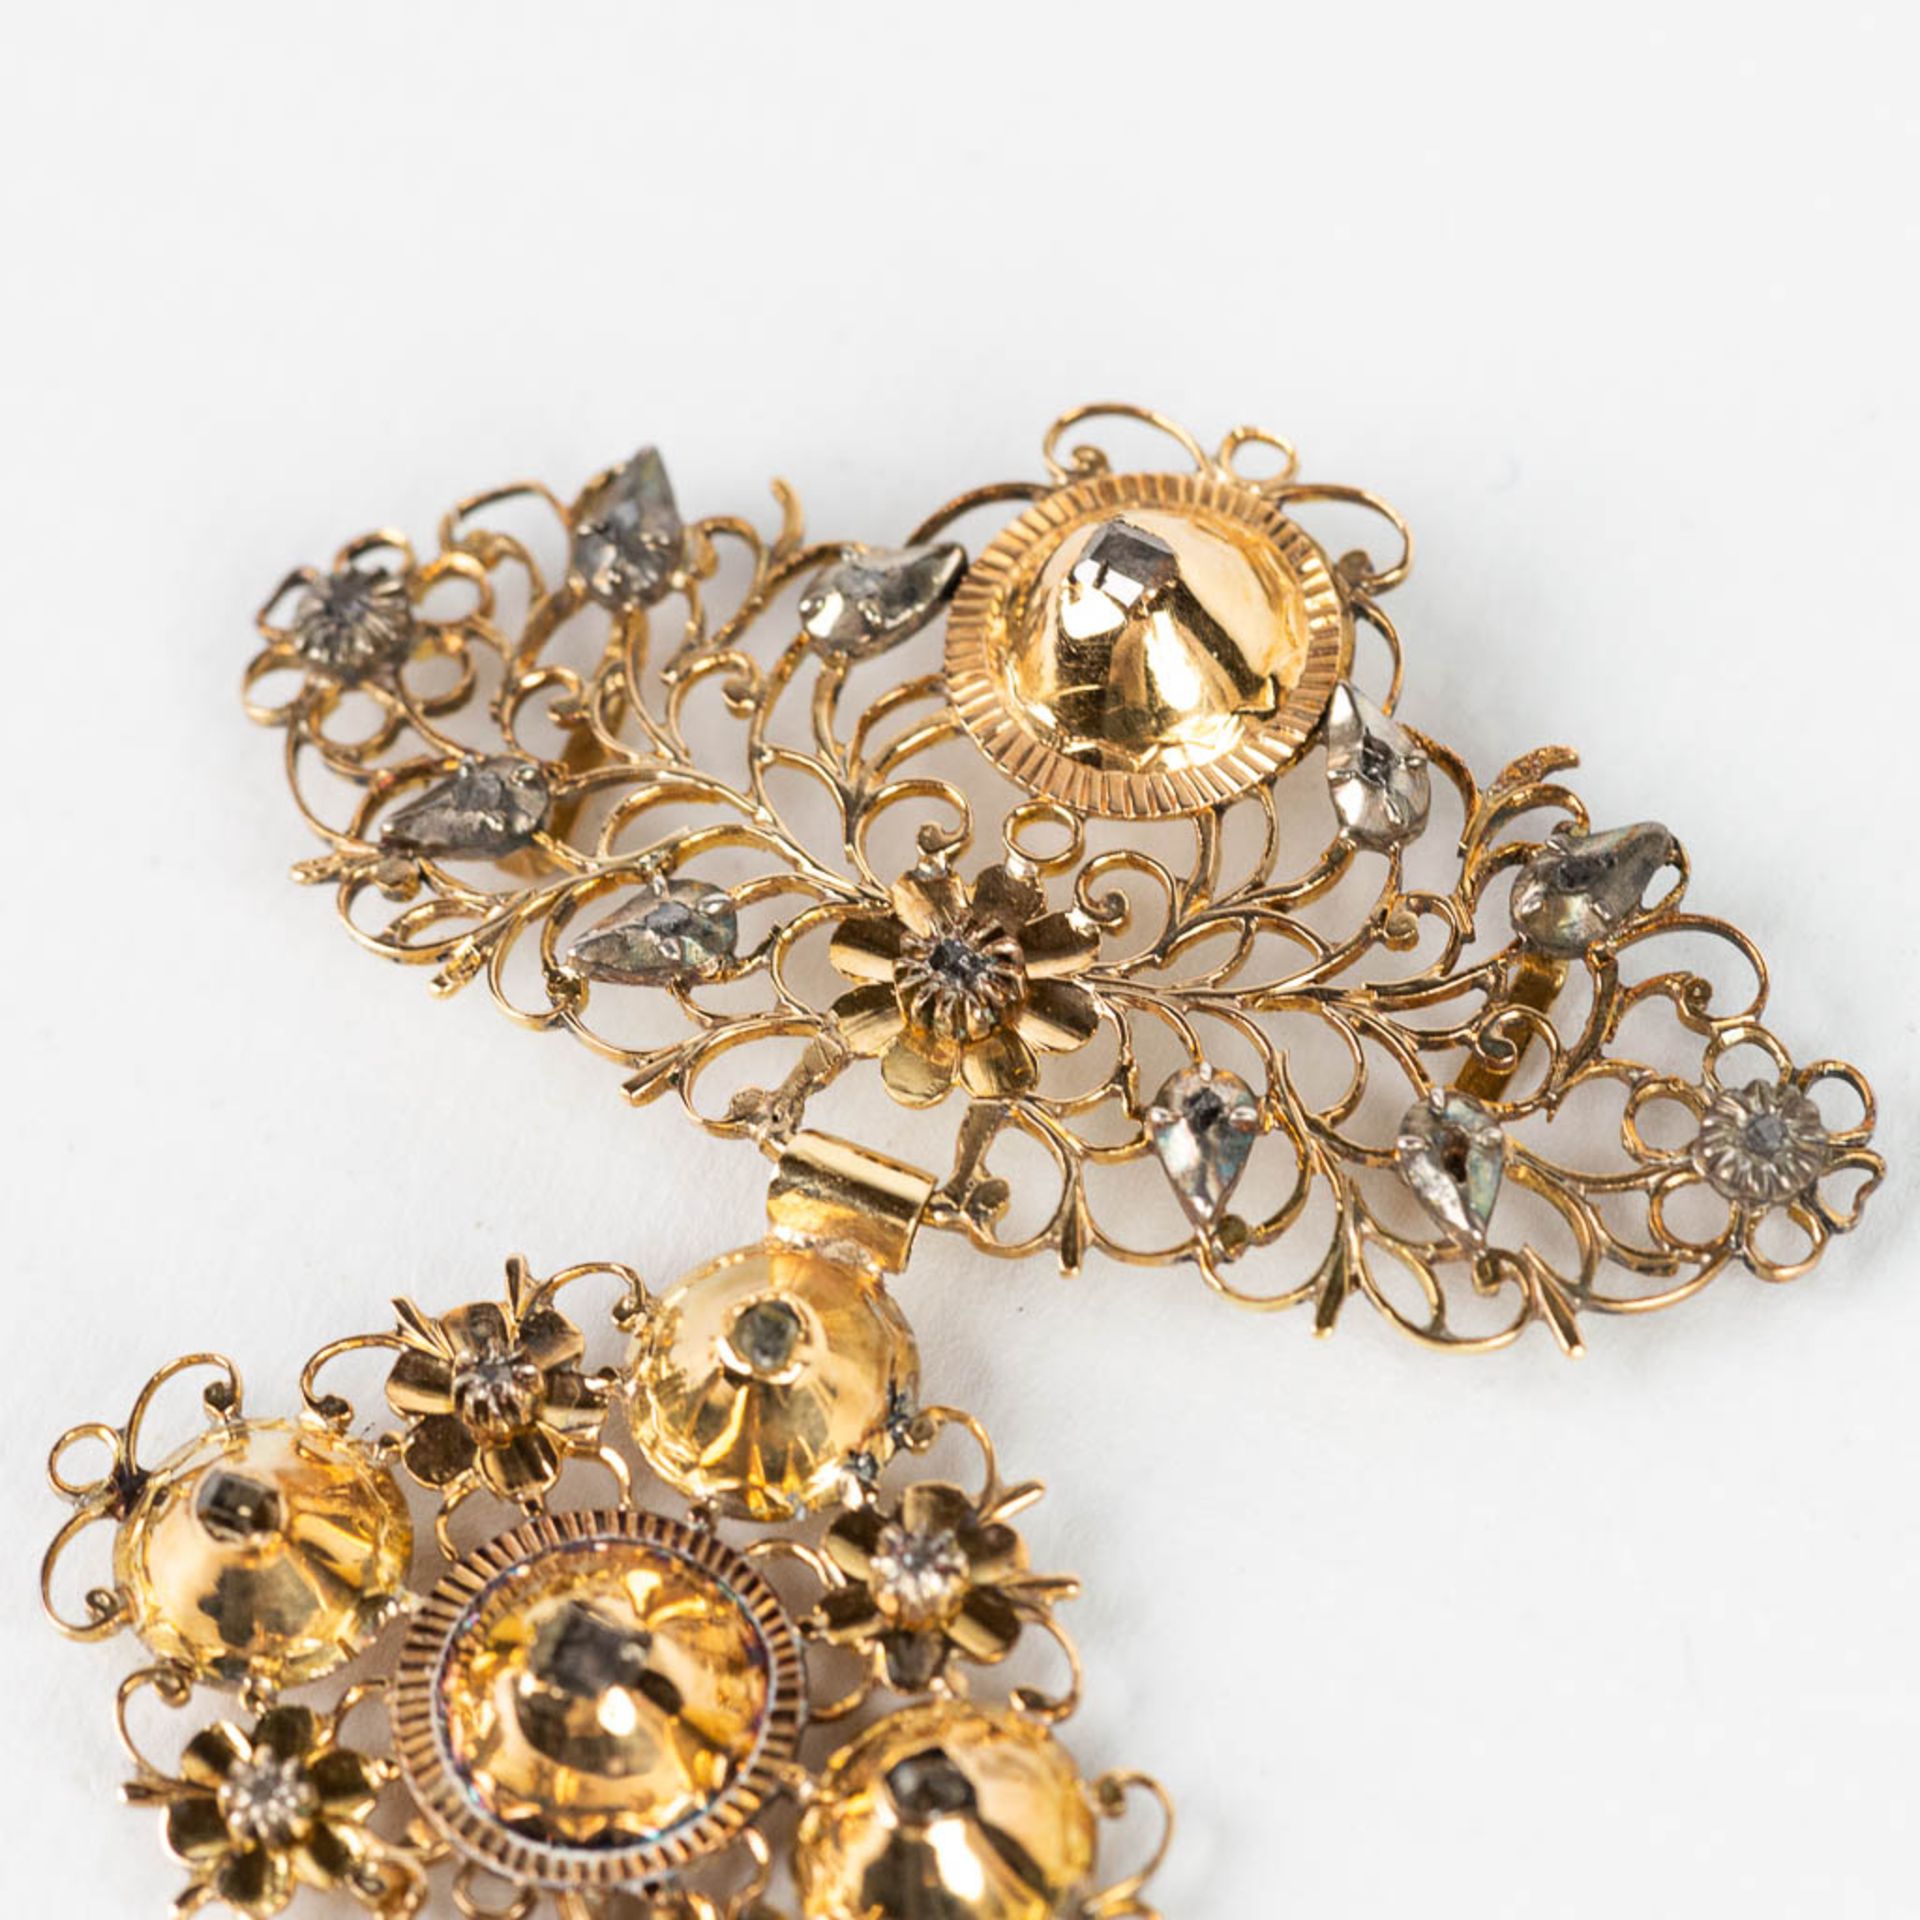 An antique brooch decorated with diamonds and made of 18 ktÊyellow gold. 18th century. (H:8cm) - Image 3 of 7